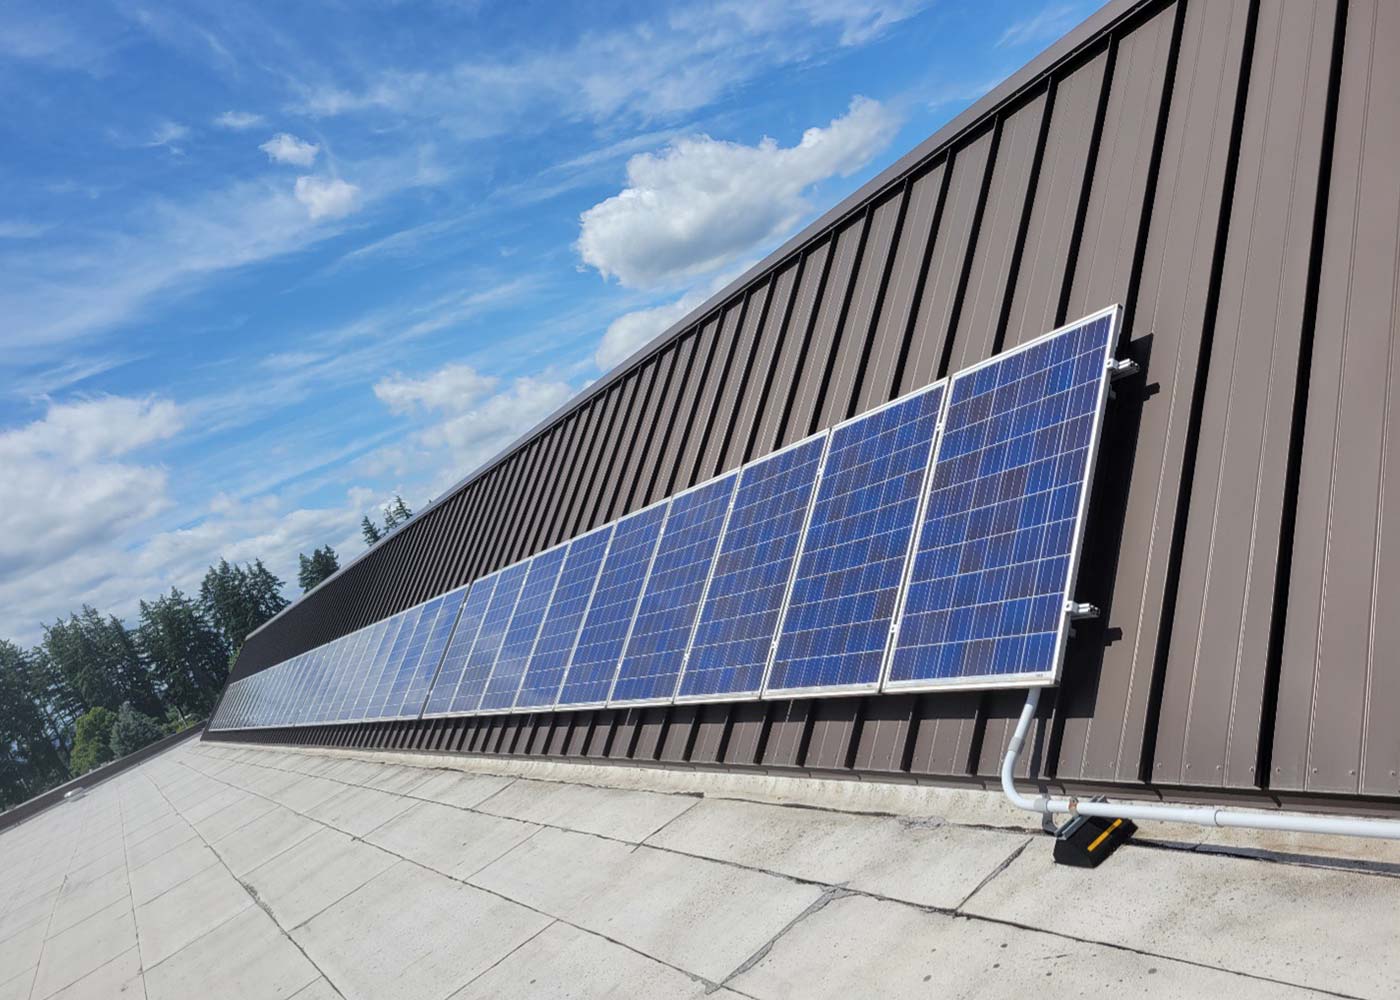 Avery Operations Center:  This facility had a small array installed when it was built in 2012. While smaller than the other solar arrays on this list, producing about 9kW of solar energy, it remains an important example of rooftop renewable generation.